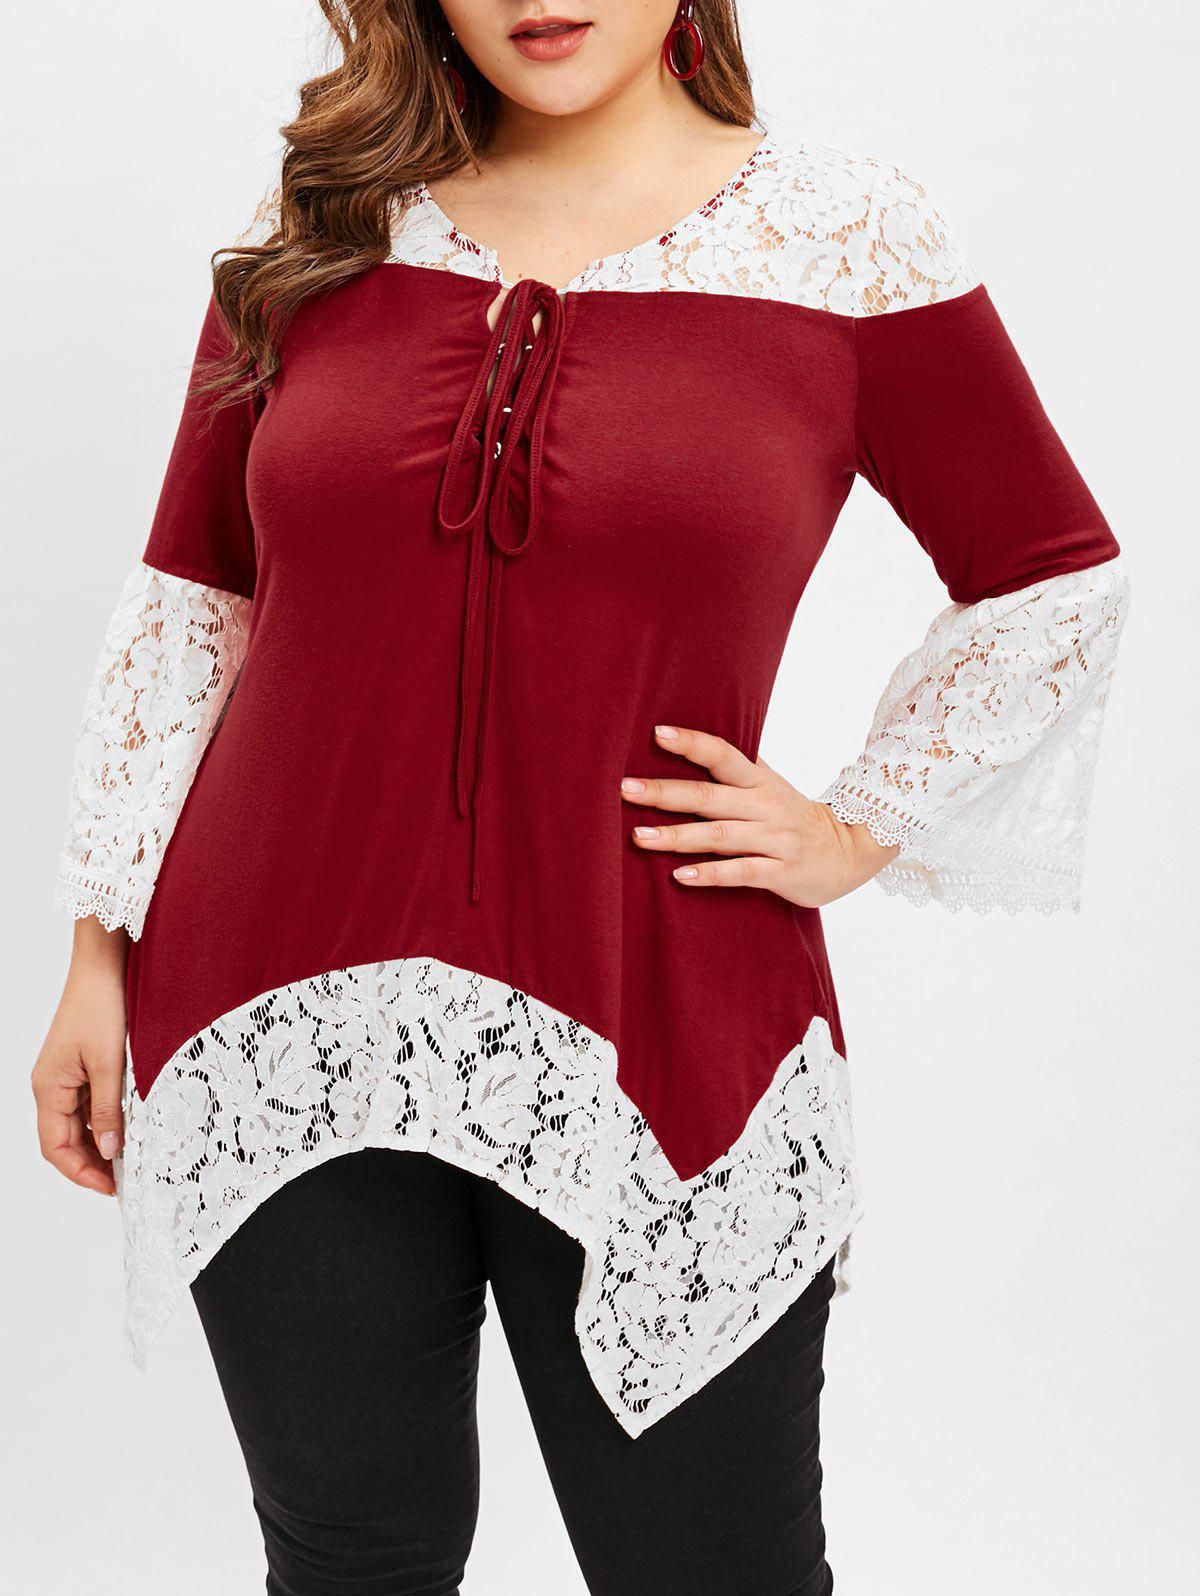 Plus Size Lace Panel Flare Sleeve Asymmetrical Top - L